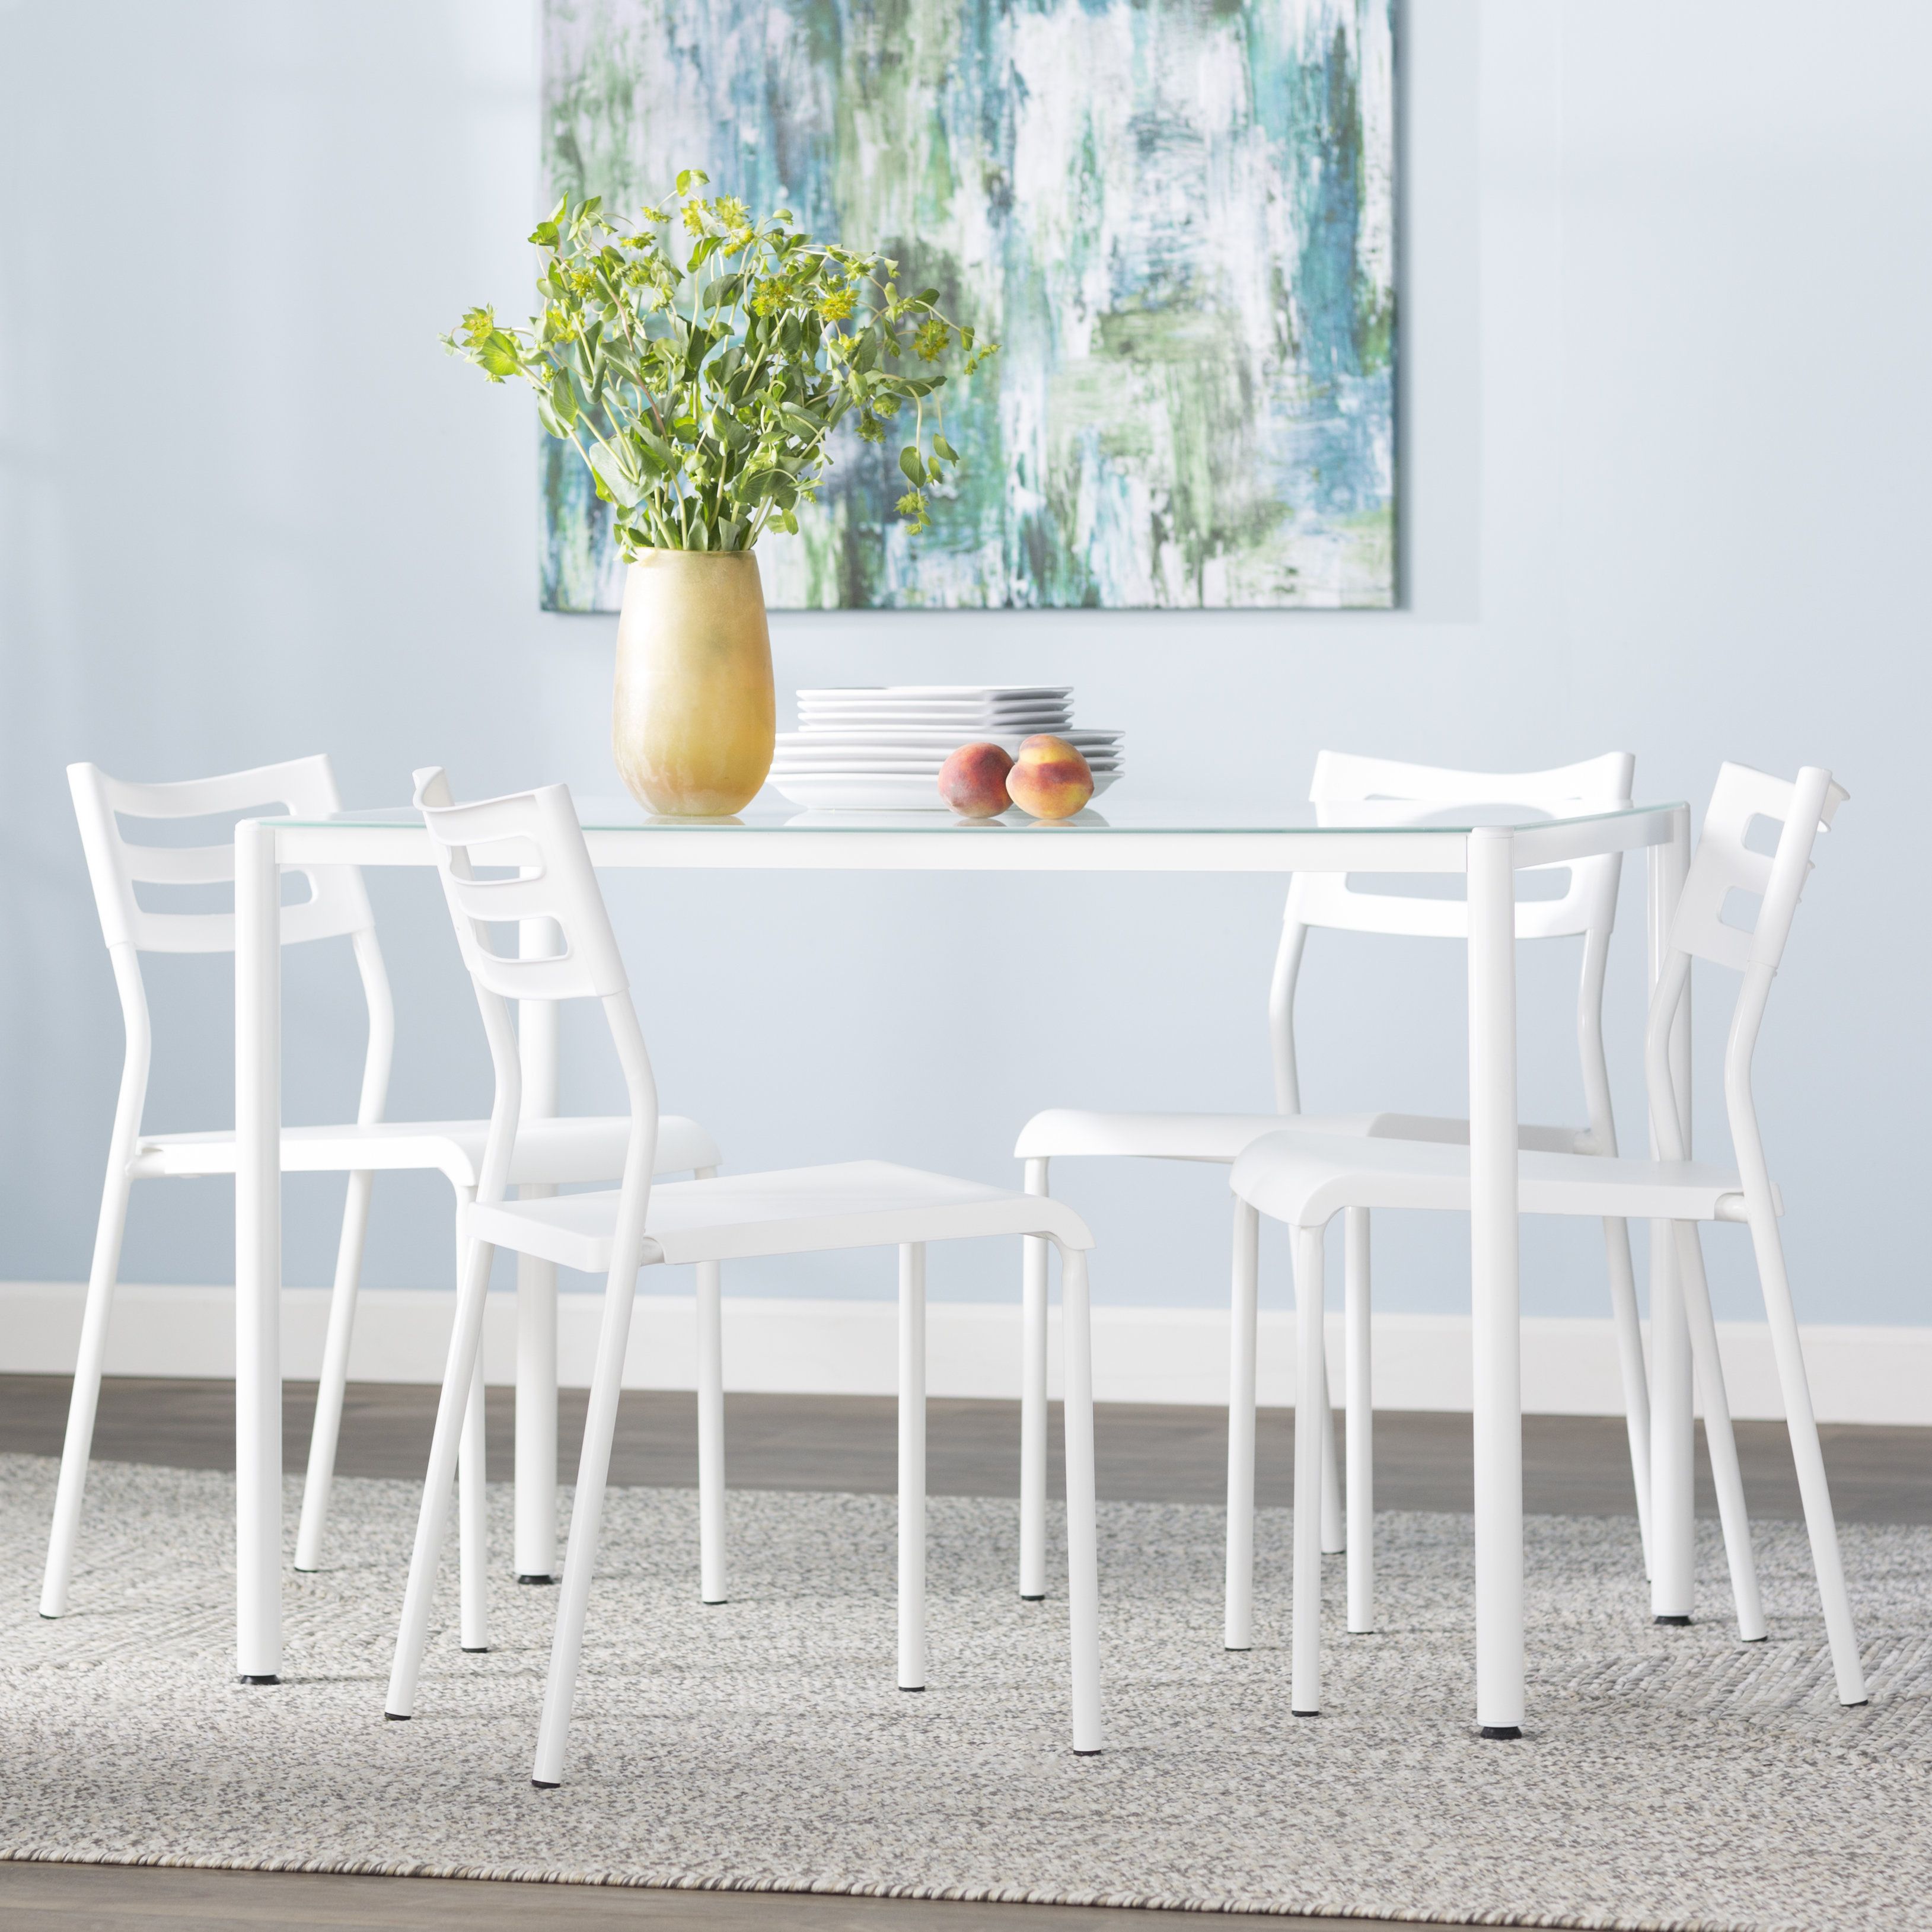 Wayfair With 5 Piece Breakfast Nook Dining Sets (View 16 of 20)